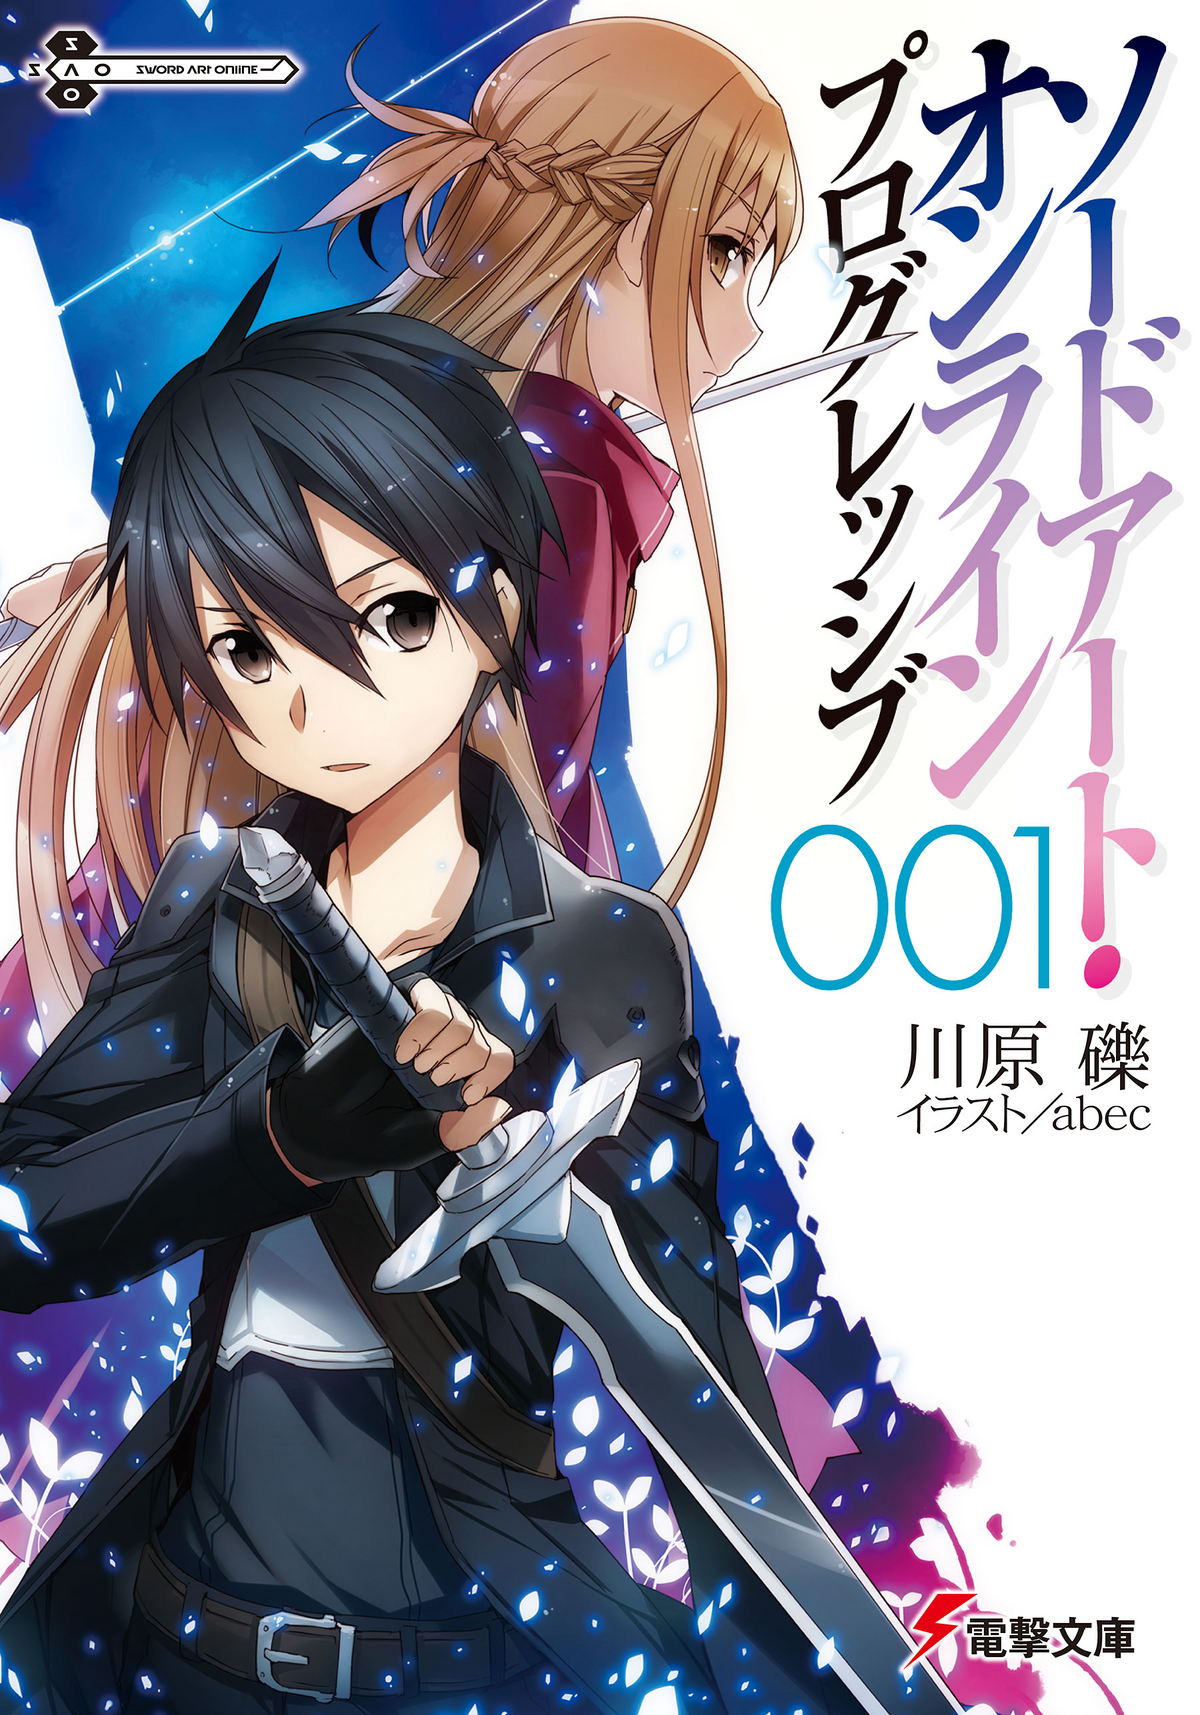 Sword Art Online Creator Explains How the Anime Helped His Writing